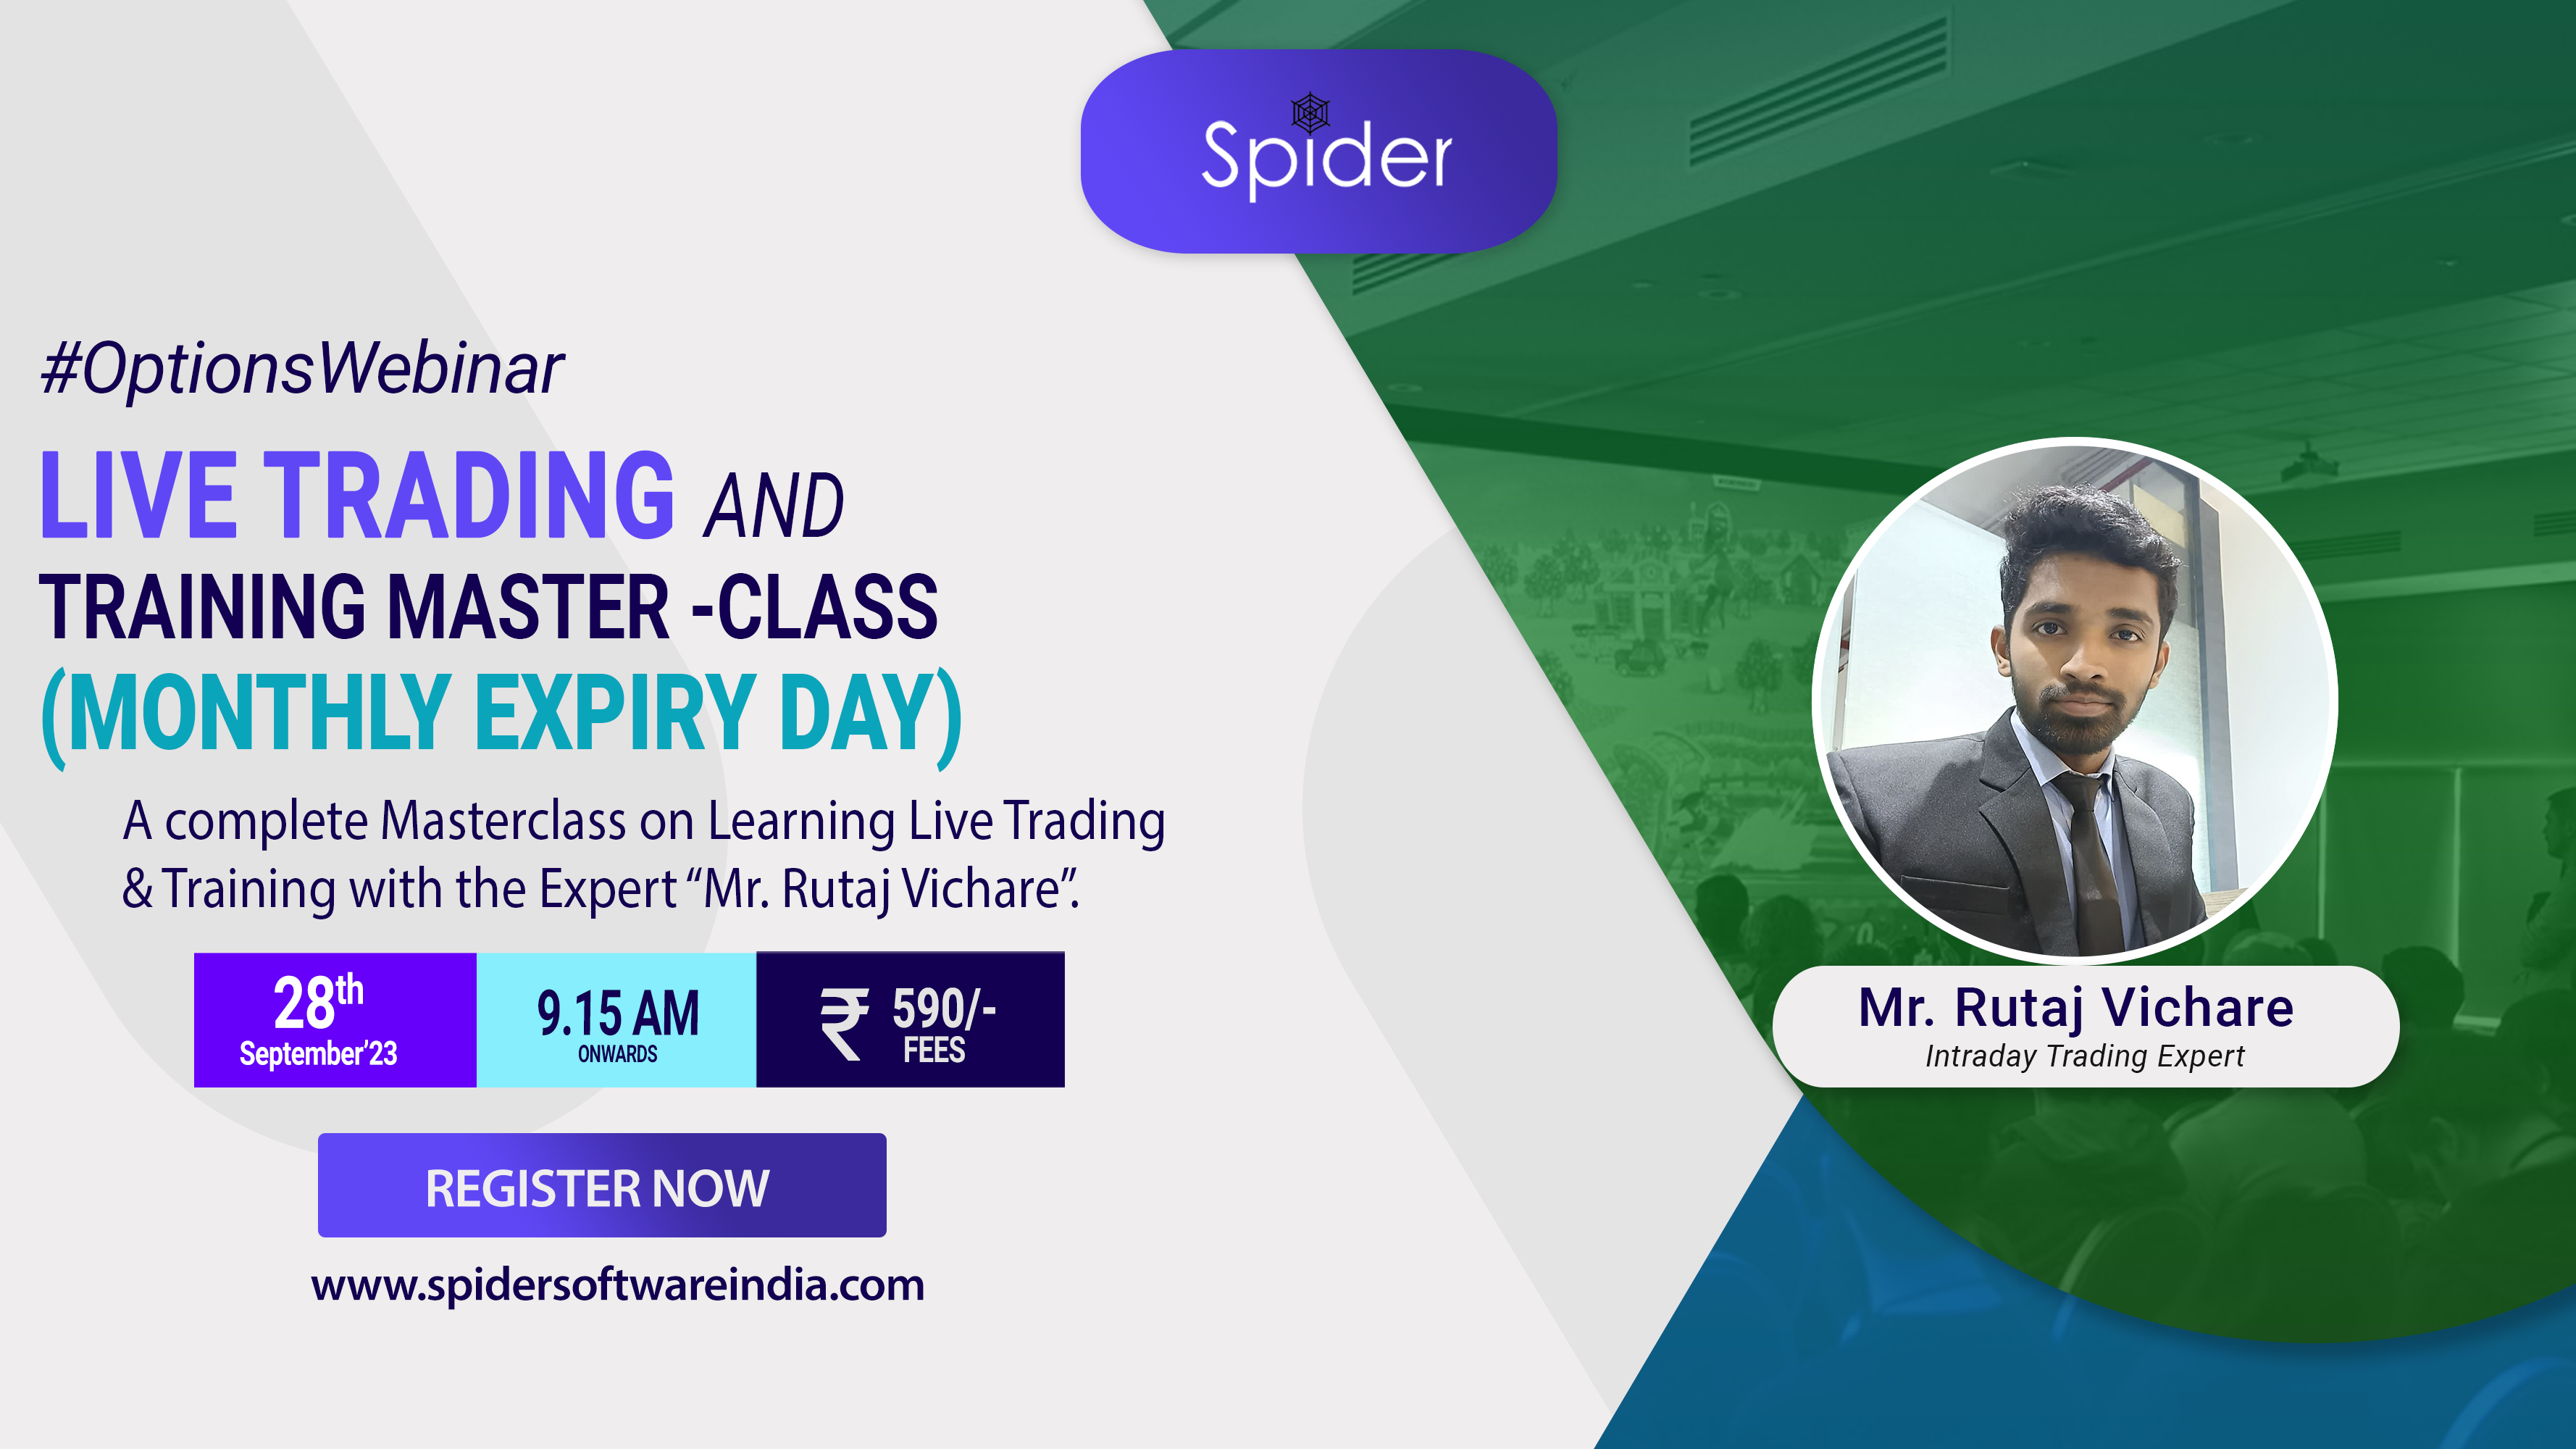 The image explain about the upcoming Webinar on Live Trading & Training on Monthly Expiry Day, conducted by Spider Software Pvt Ltd.